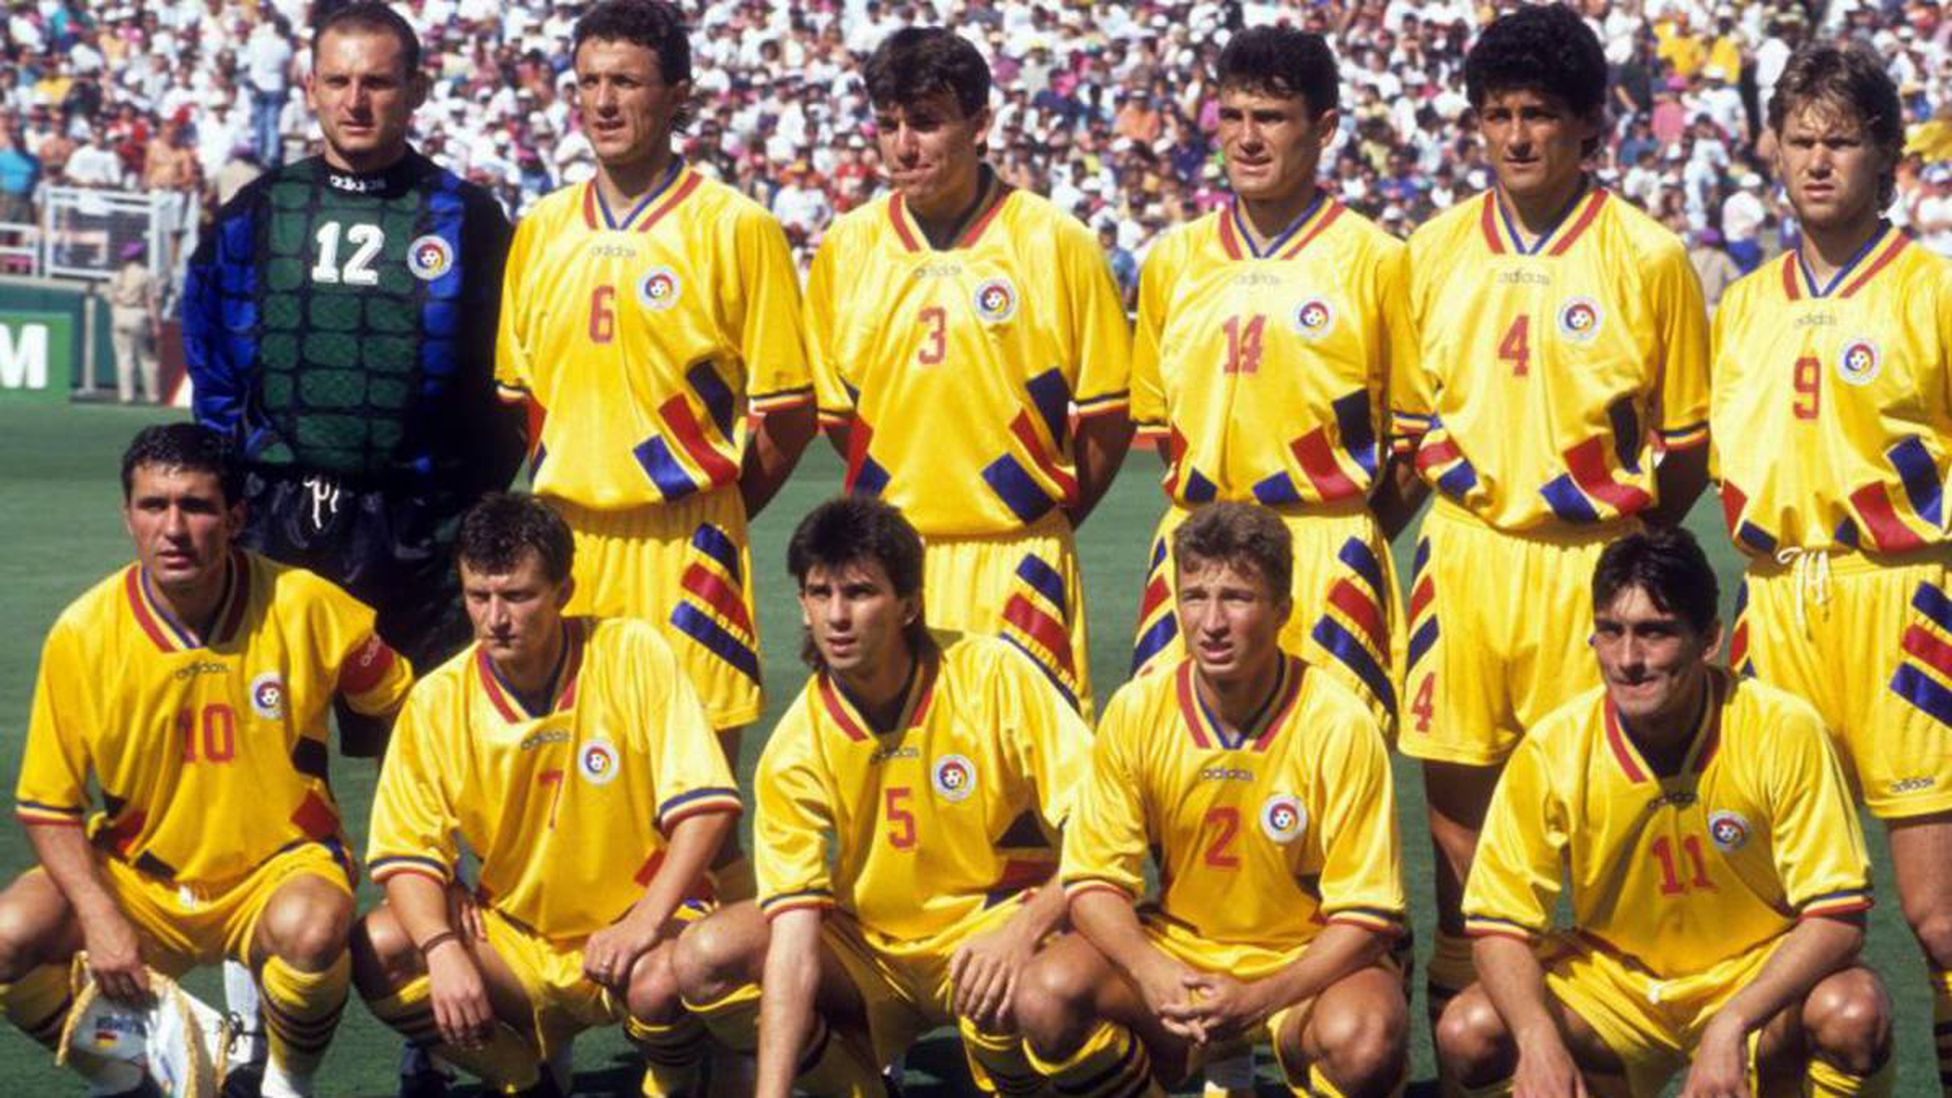 USA 94, the best Romanian football team in history